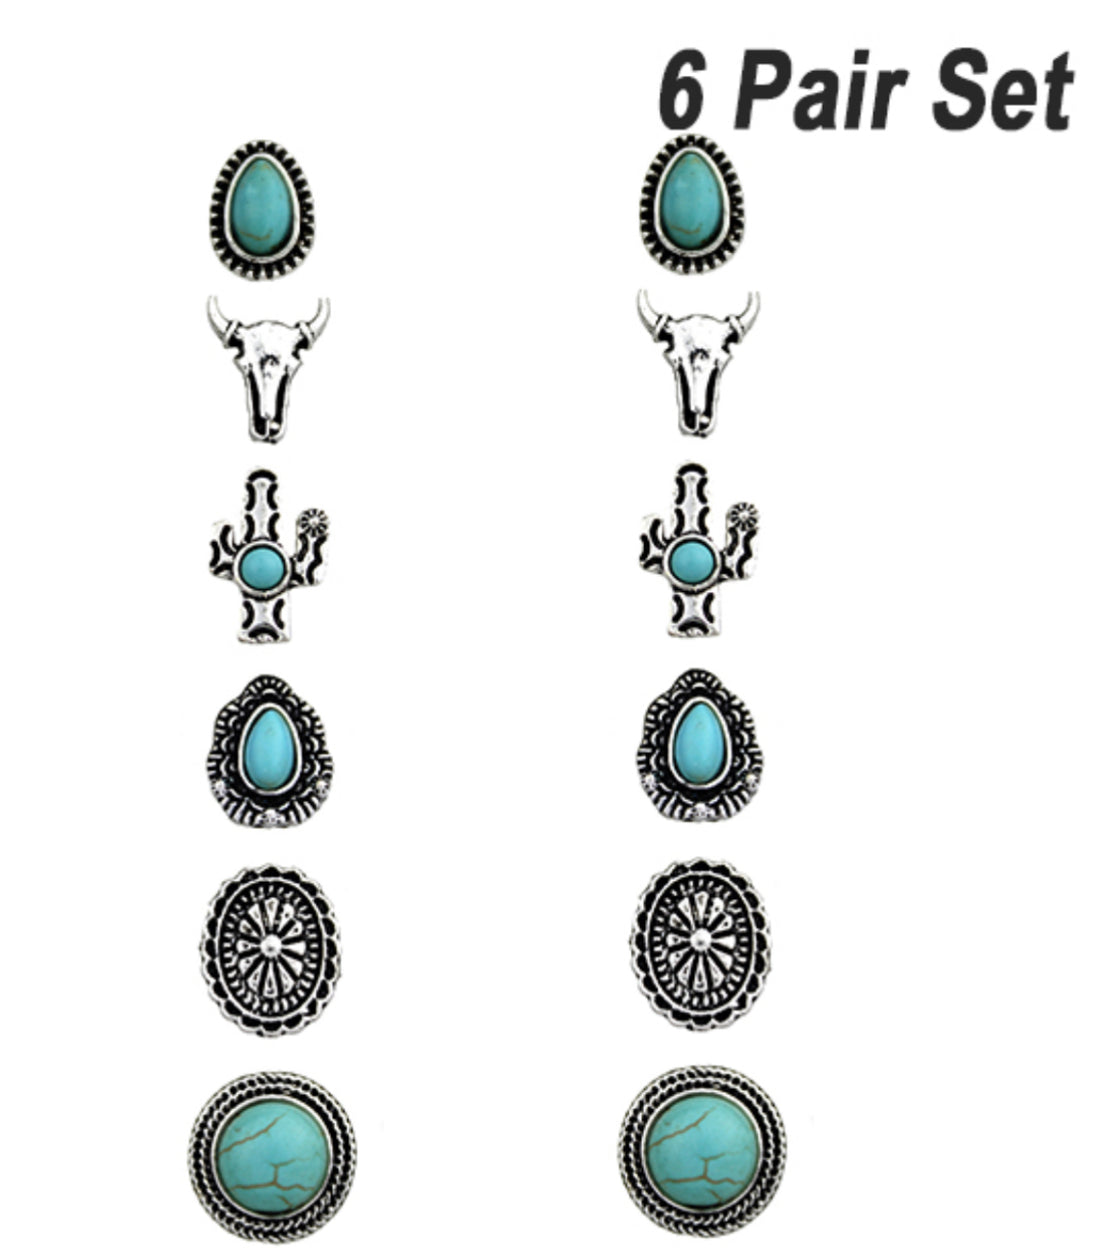 Collection of Burnished Silver and Turquoise and Rhinestone Stud Earrings